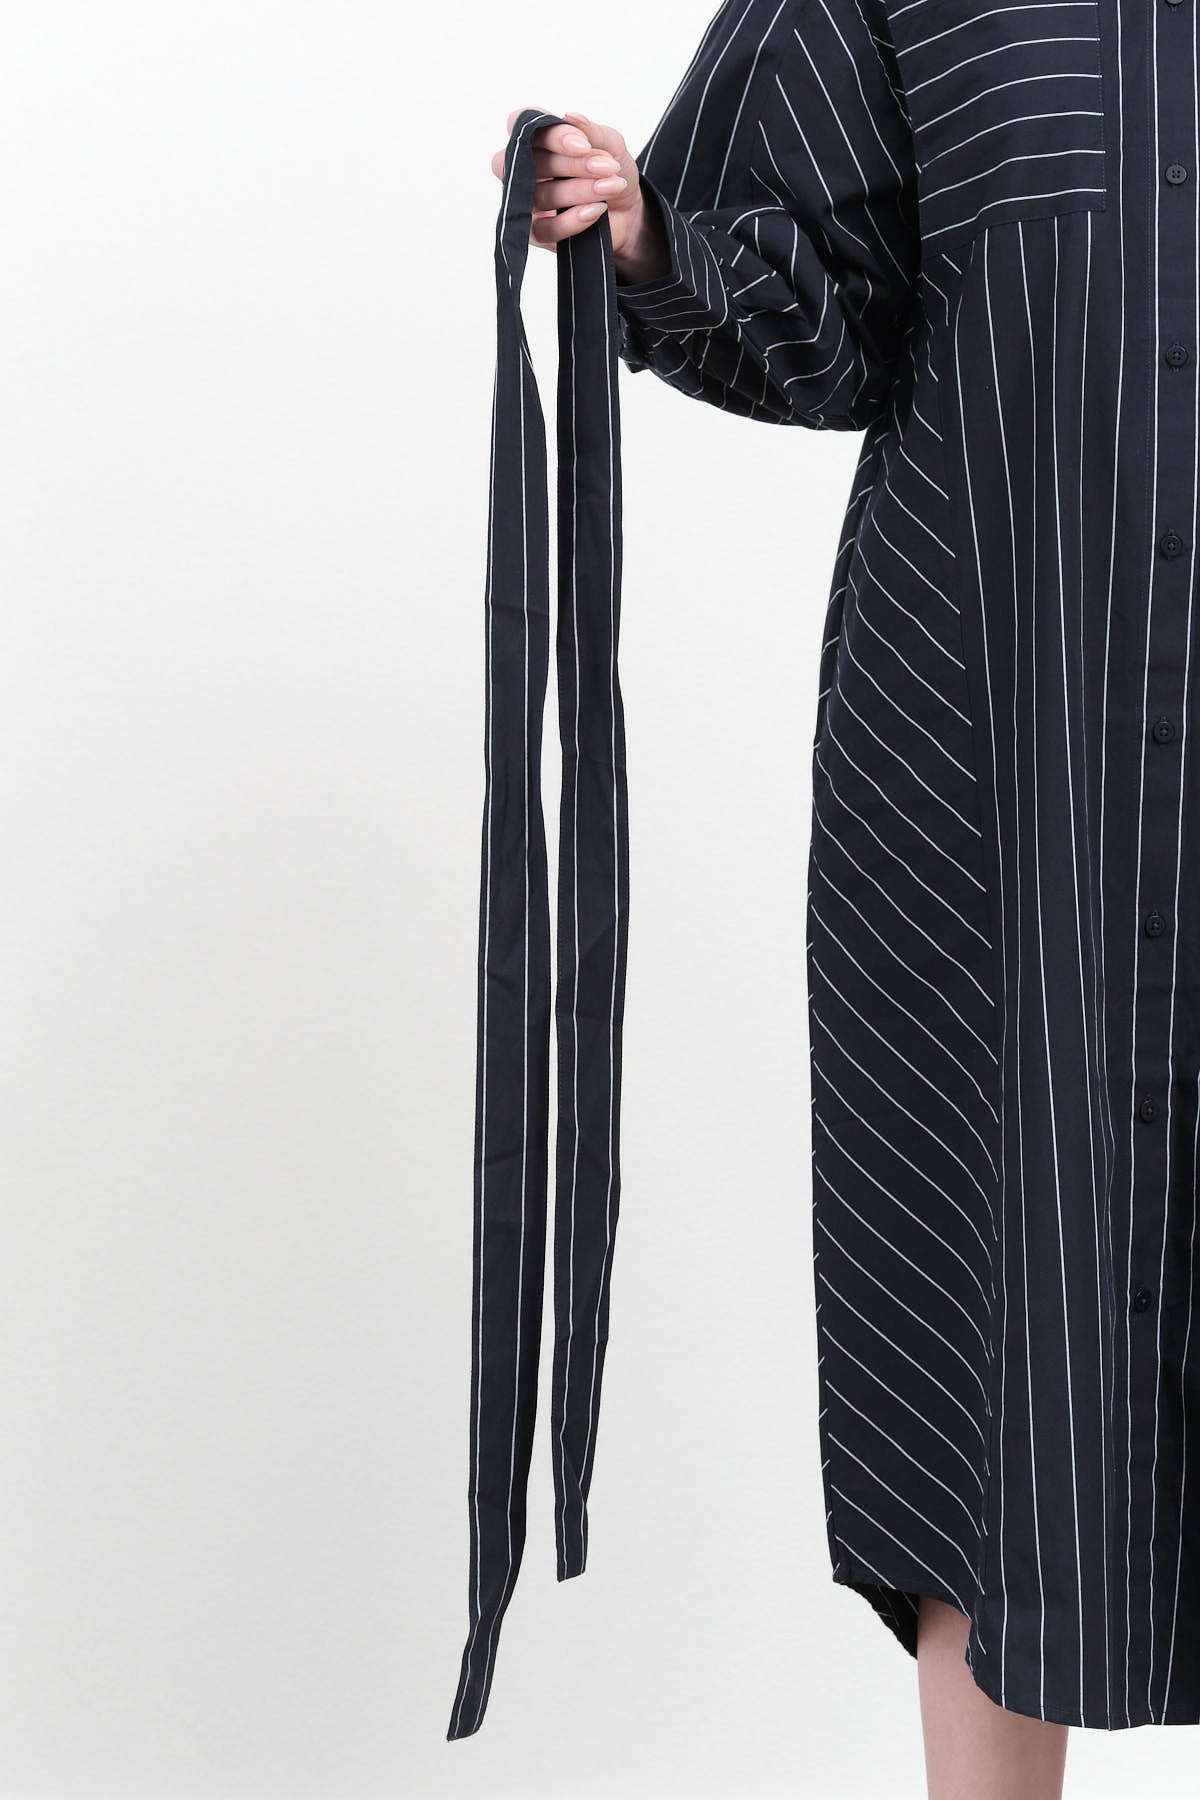 Kowtow Yves Shirt Dress in Navy Pinstripe with Fully Removable Matching Belt and Long Sleeves